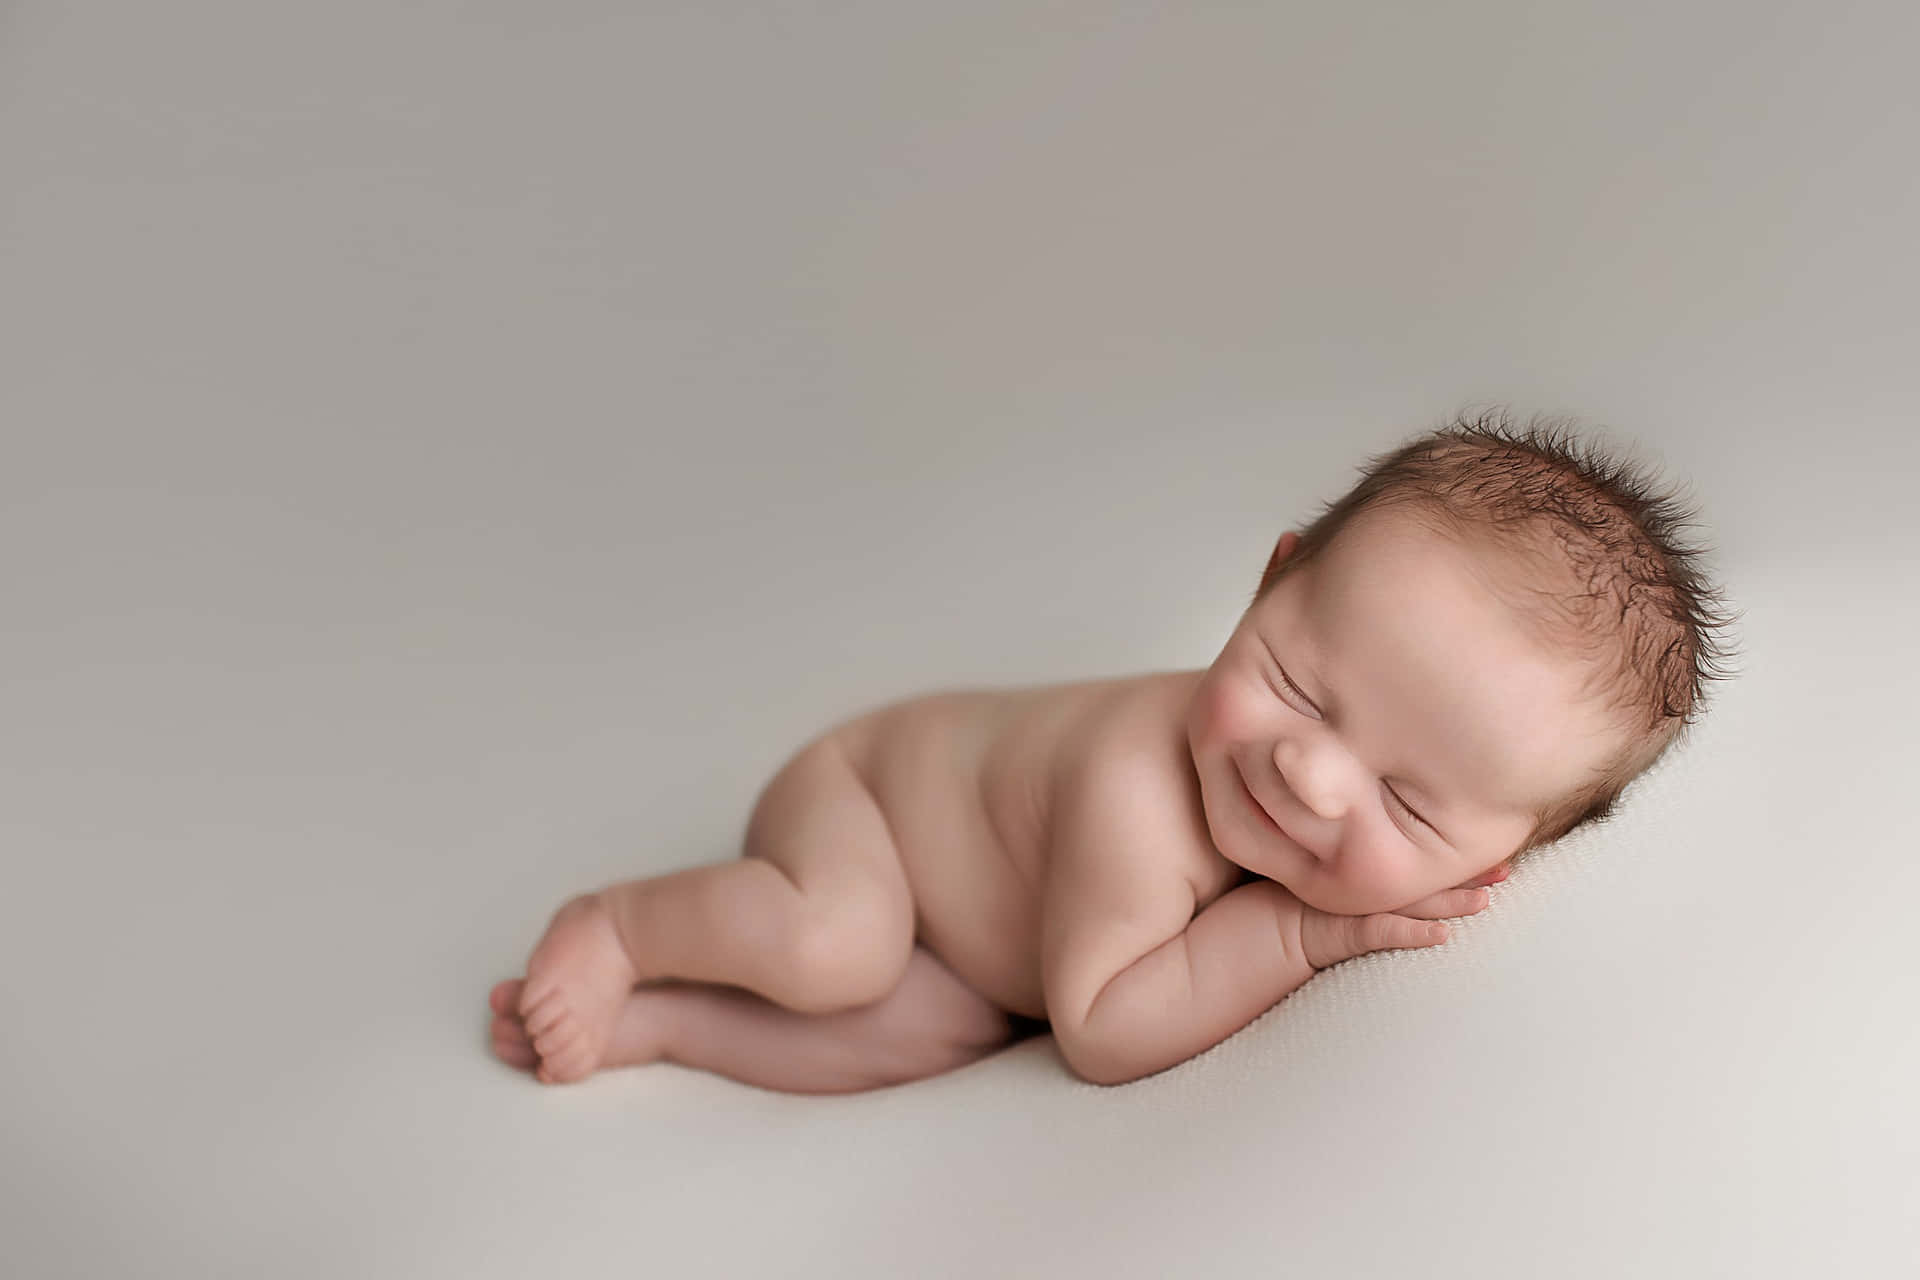 A Baby Boy Is Laying On A Gray Background